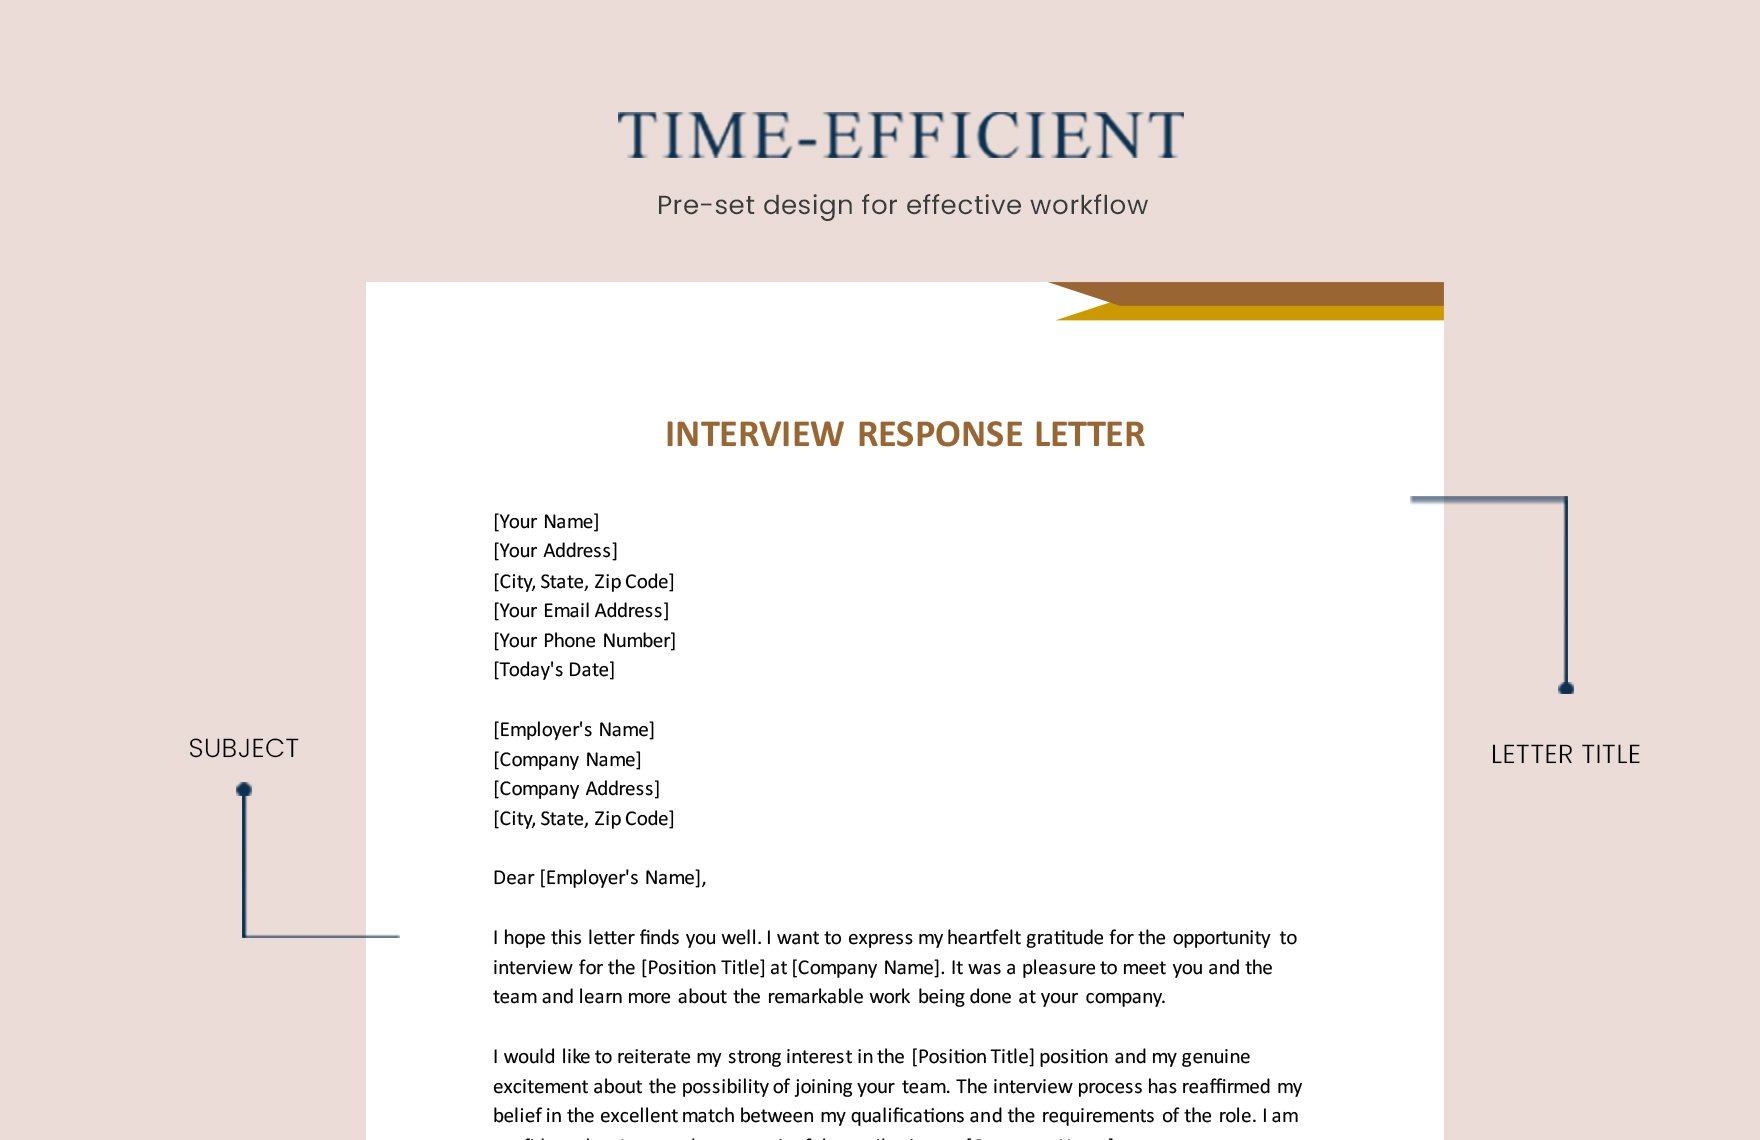 Interview Response Letter